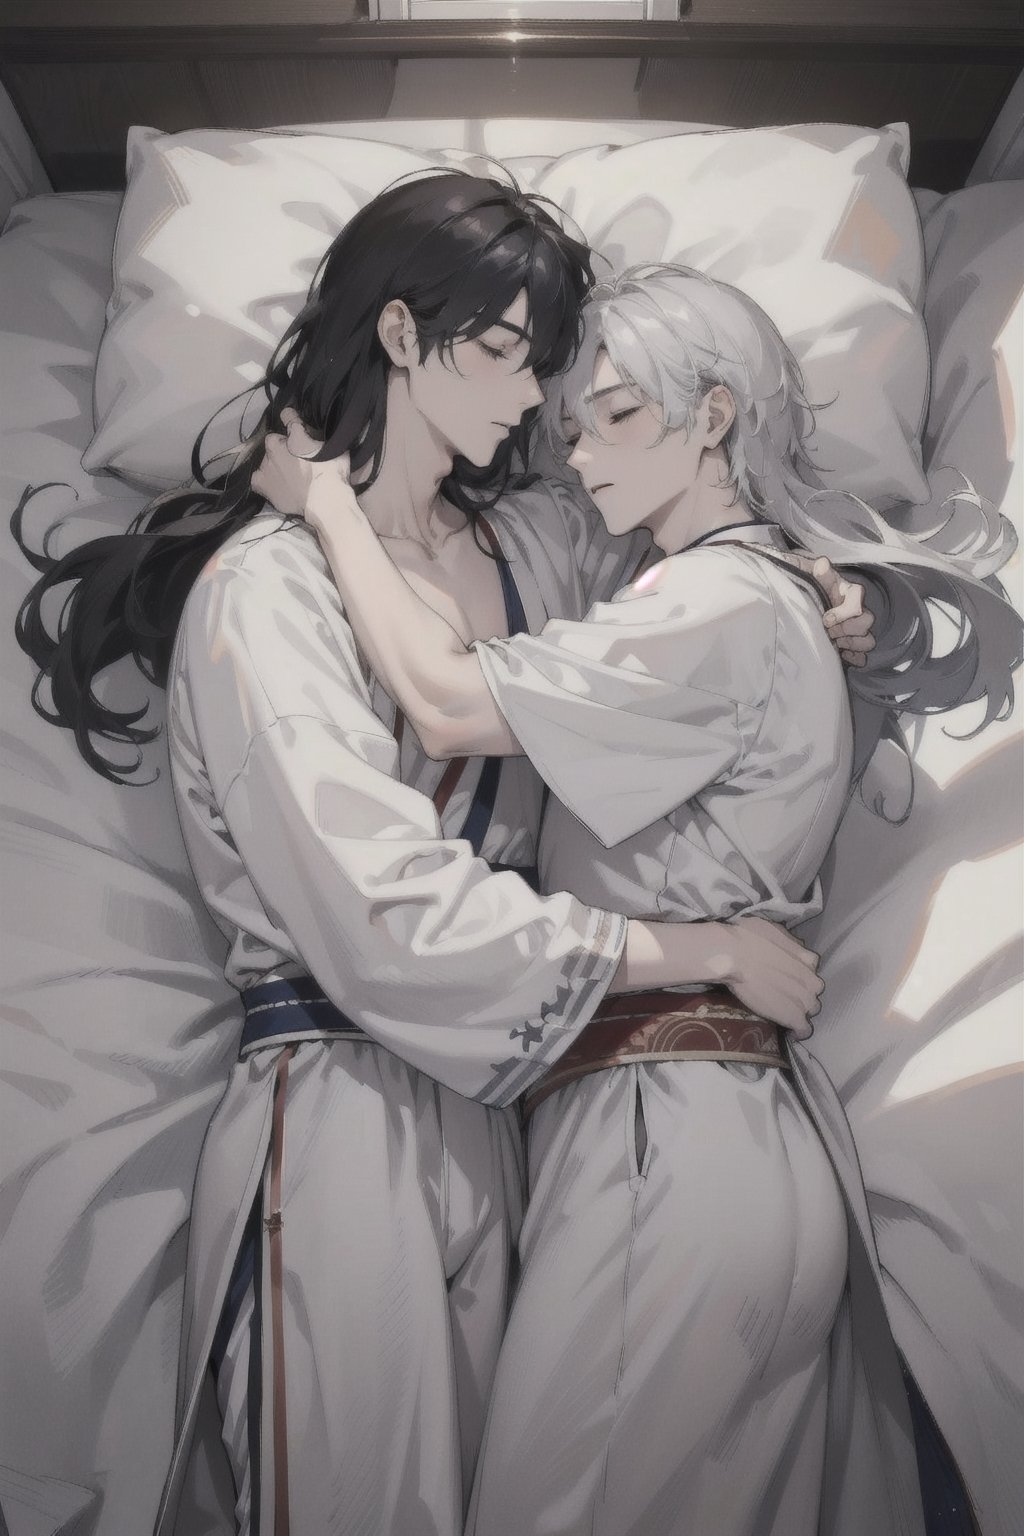 (masterpiece, best quality), ultra high resolution, detailed face, perfect focus, (2boys), sleeping couple, hugging each other, (white hanfu), collarbone, morning light, bed, white bed sheet BREAK handsome man, black_hair AND long_hair, tall BREAK beautiful man, silver_hair AND long_hair